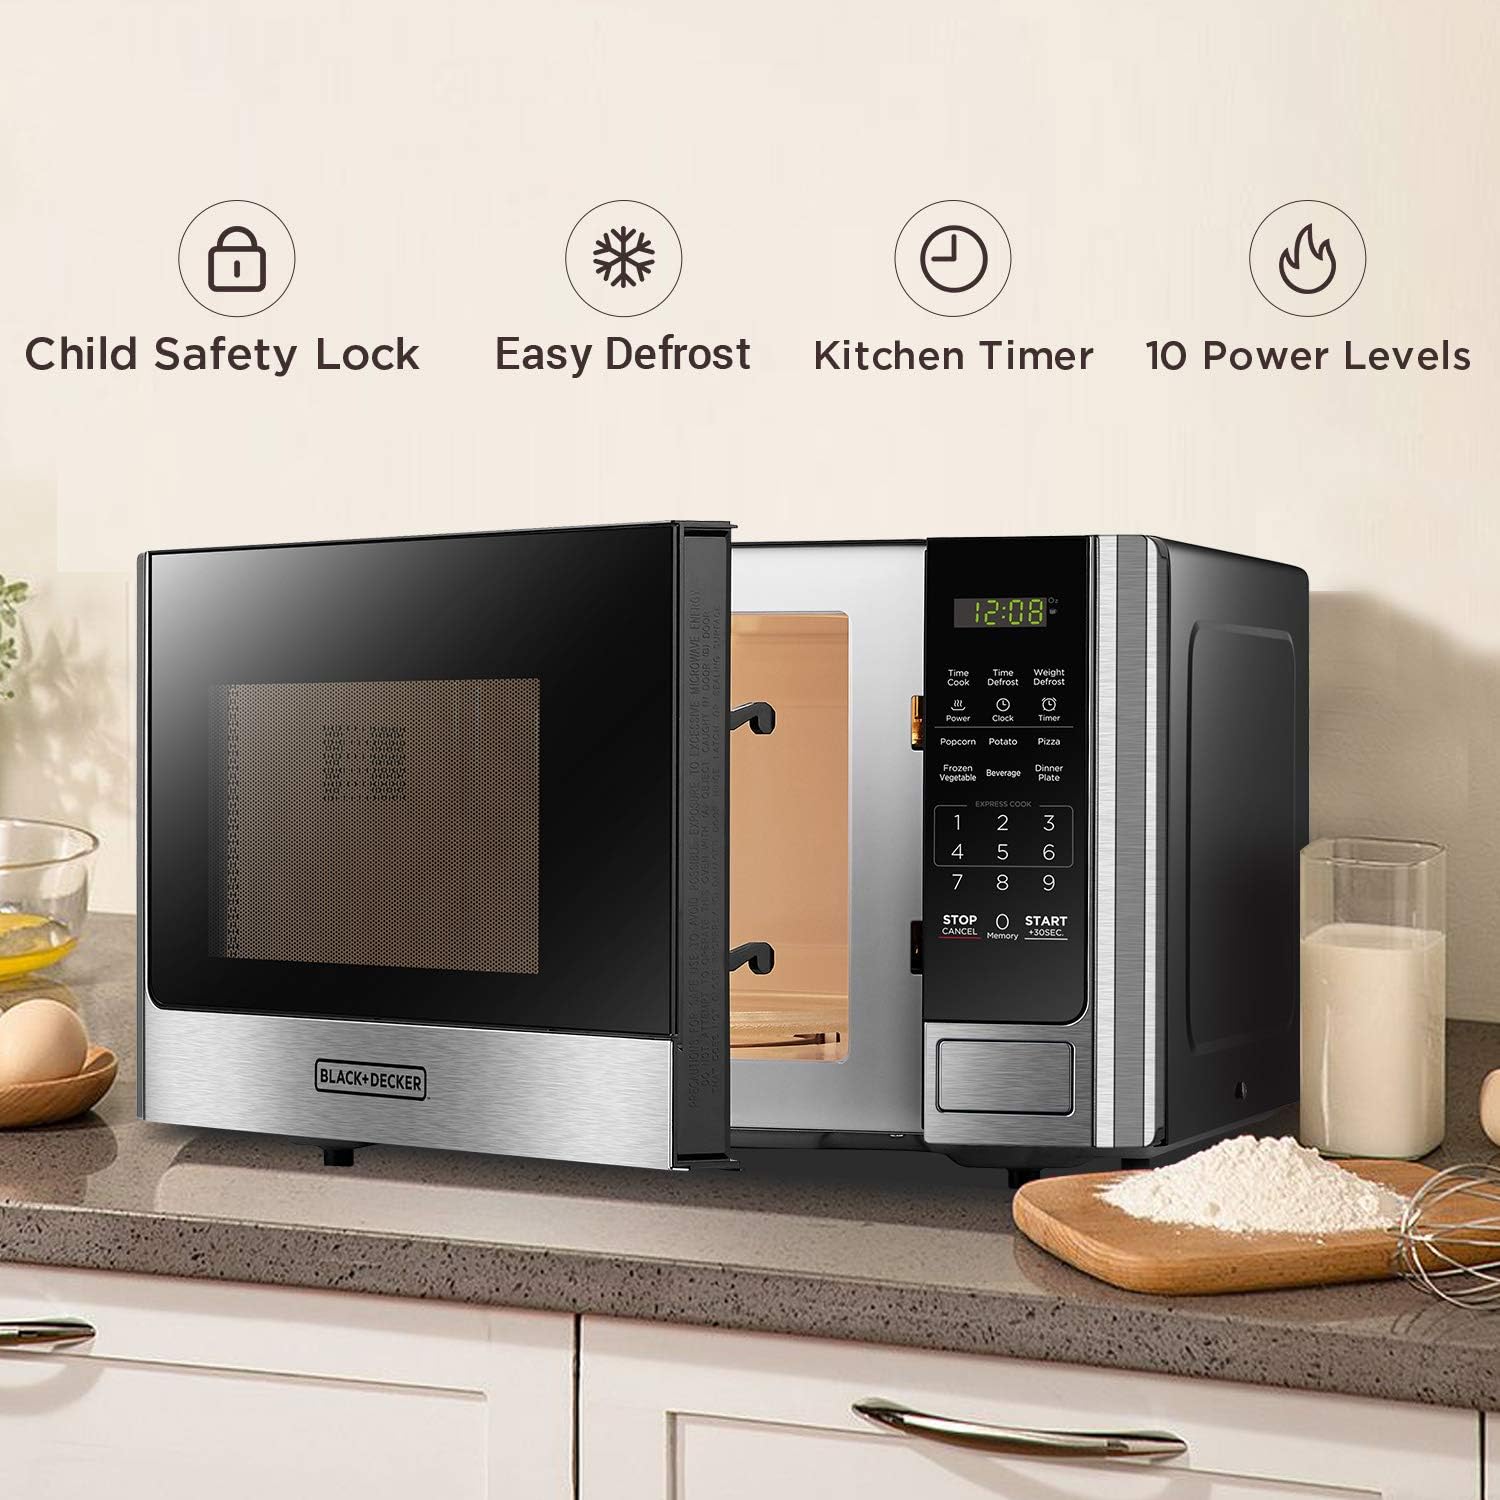 https://bigbigmart.com/wp-content/uploads/2023/07/BLACKDECKER-Digital-Microwave-Oven-with-Turntable-Push-Button-Door-Child-Safety-Lock-Stainless-Steel-0.9-Cu-Ft4.jpg